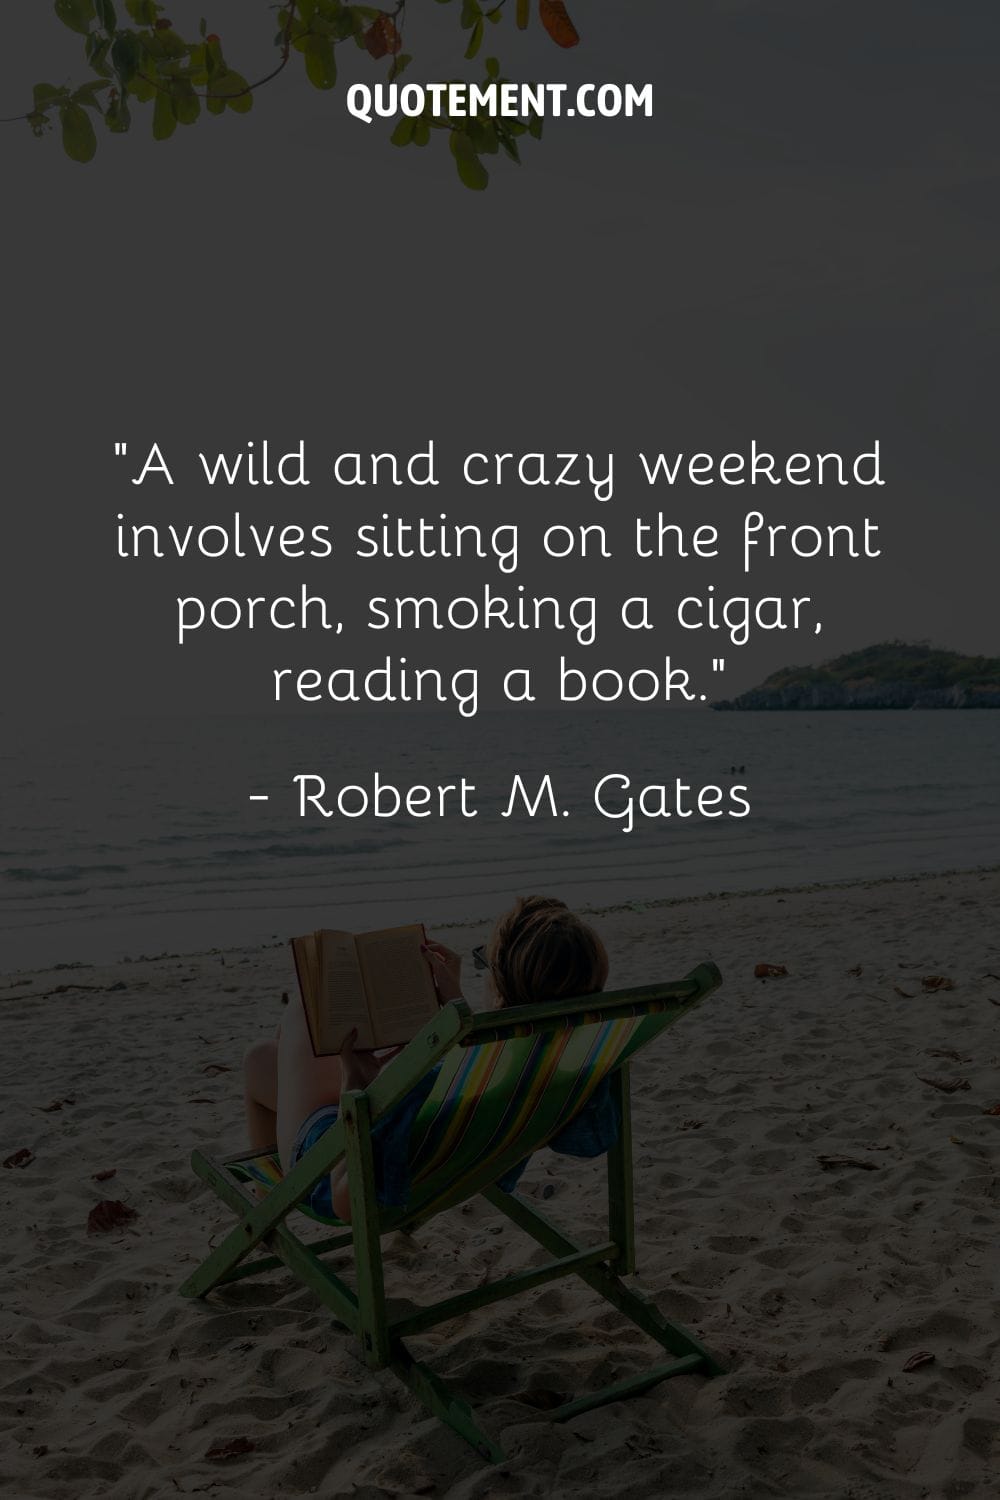 a wild and crazy weekend involves sitting on the front porch, smoking a cigar, reading a book